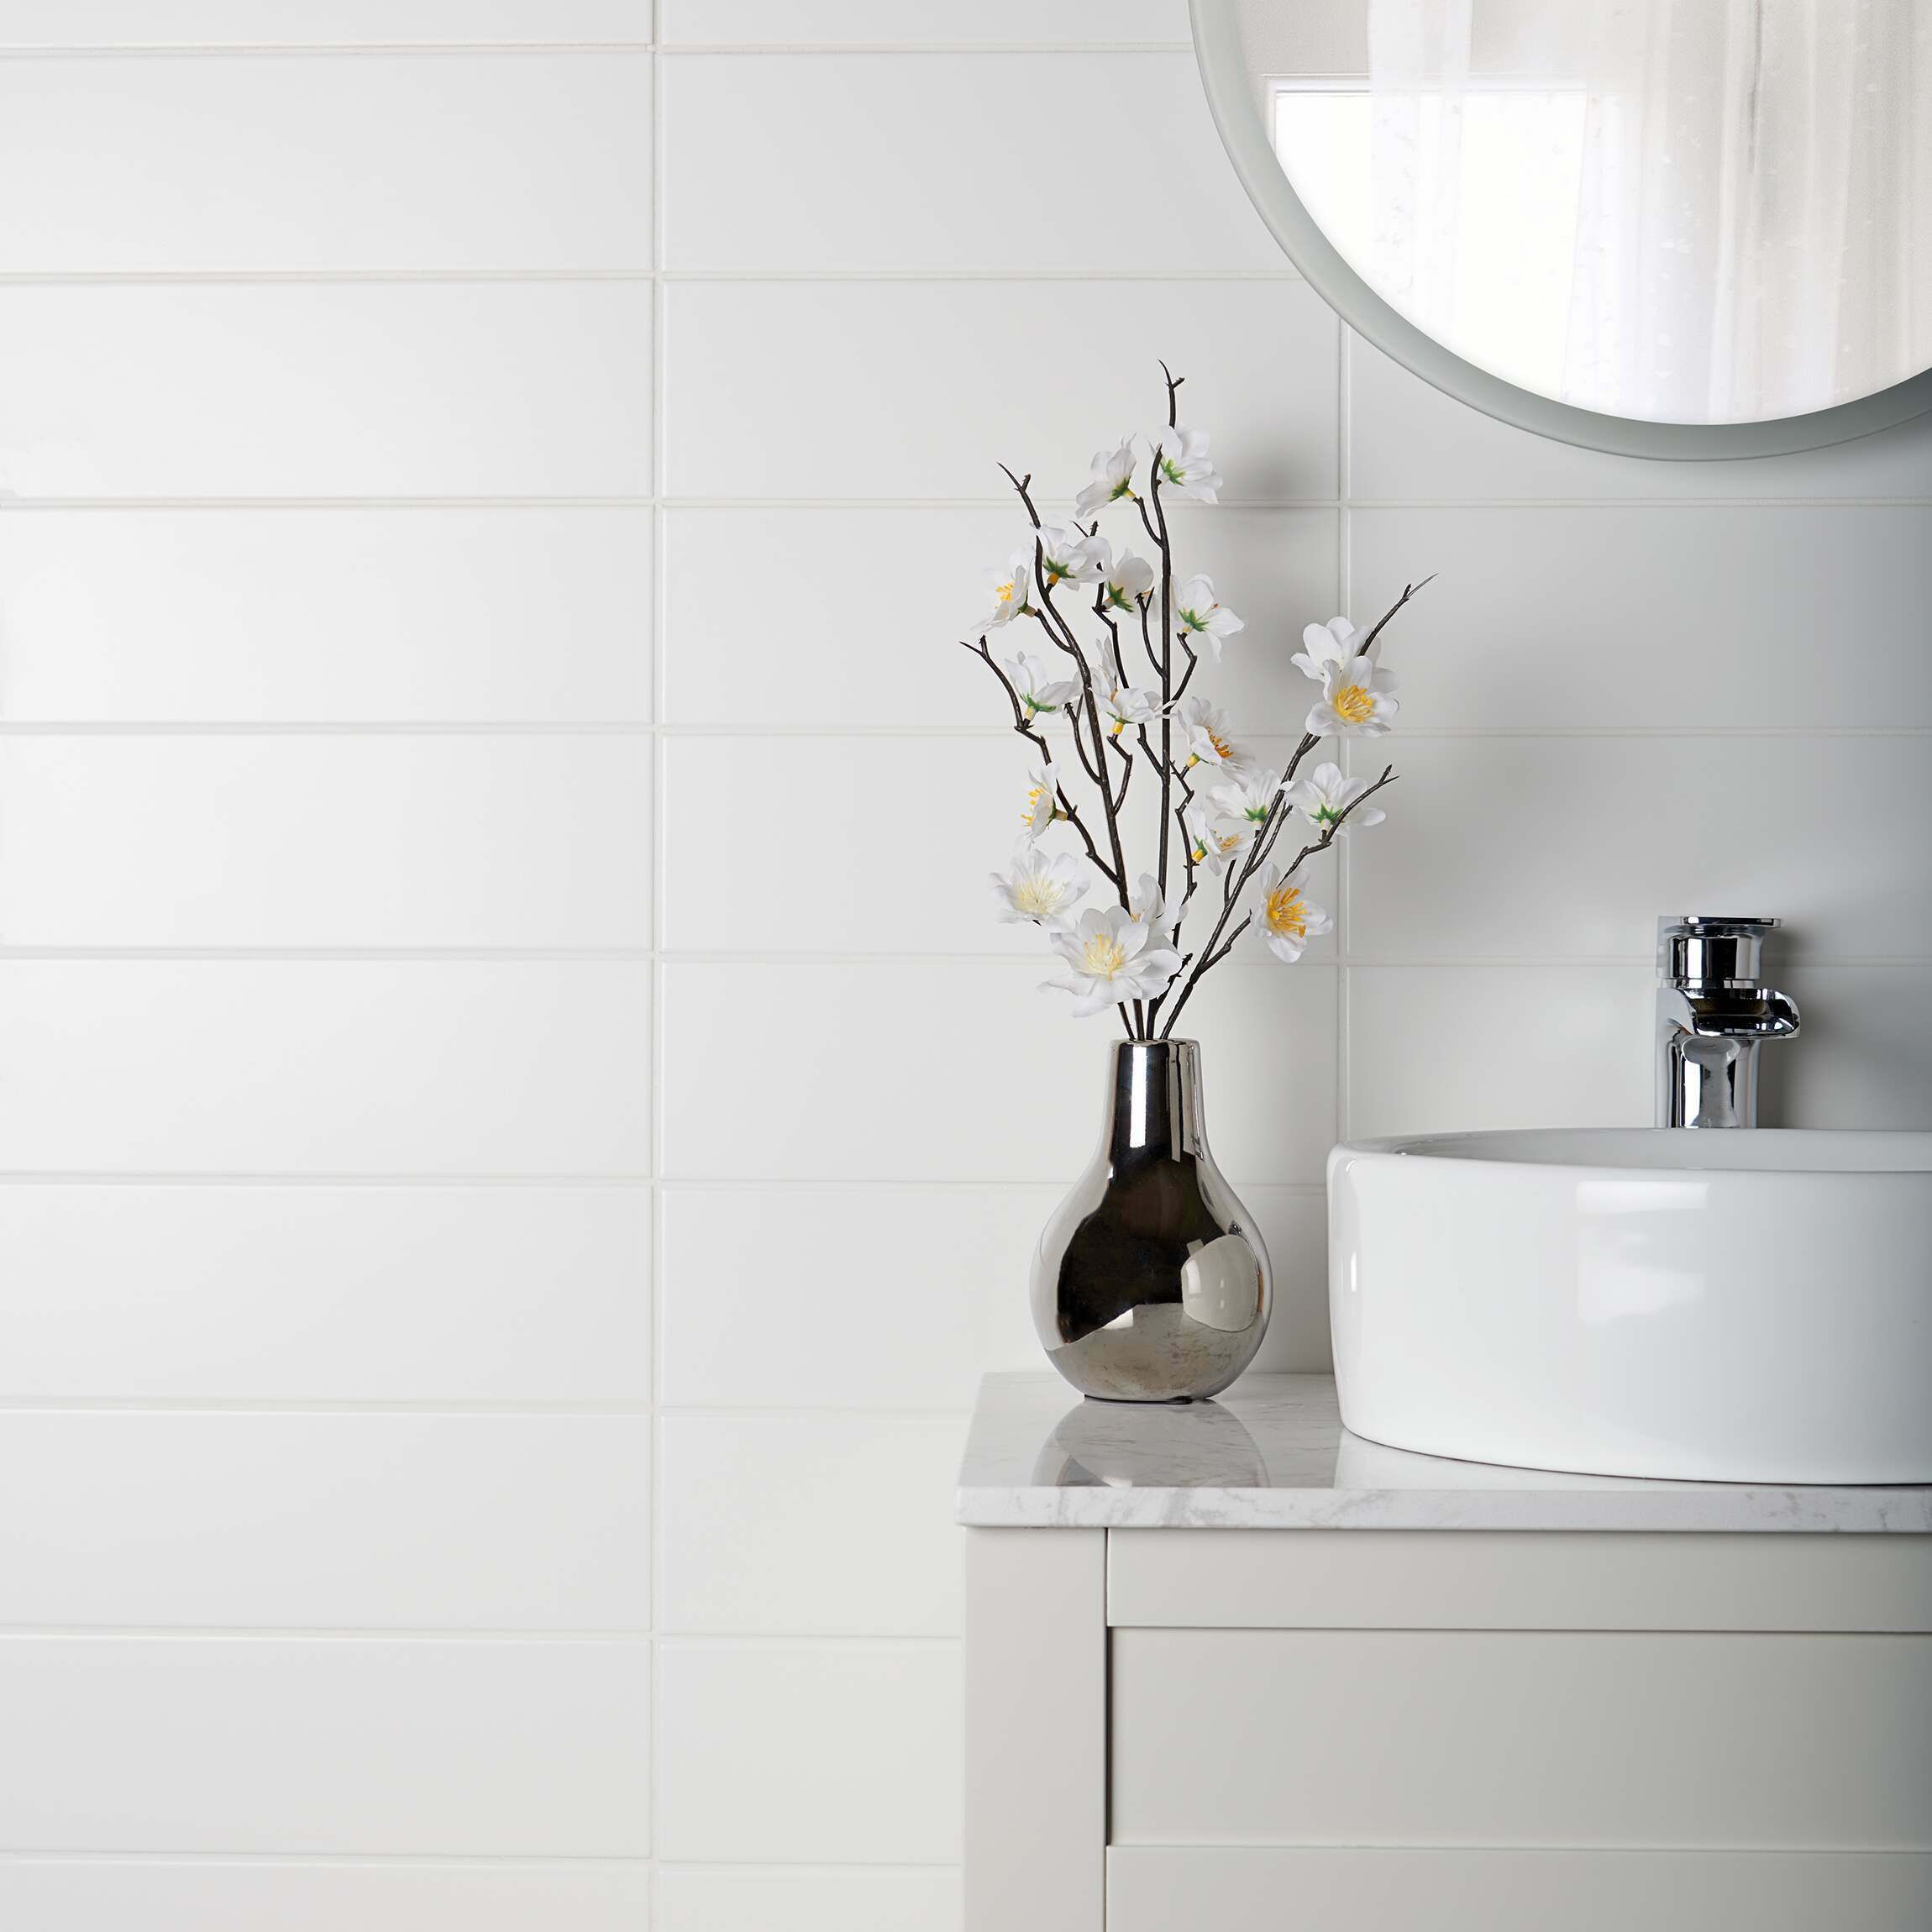 Elegance in Simplicity White Wall Tiles for Timeless Charm